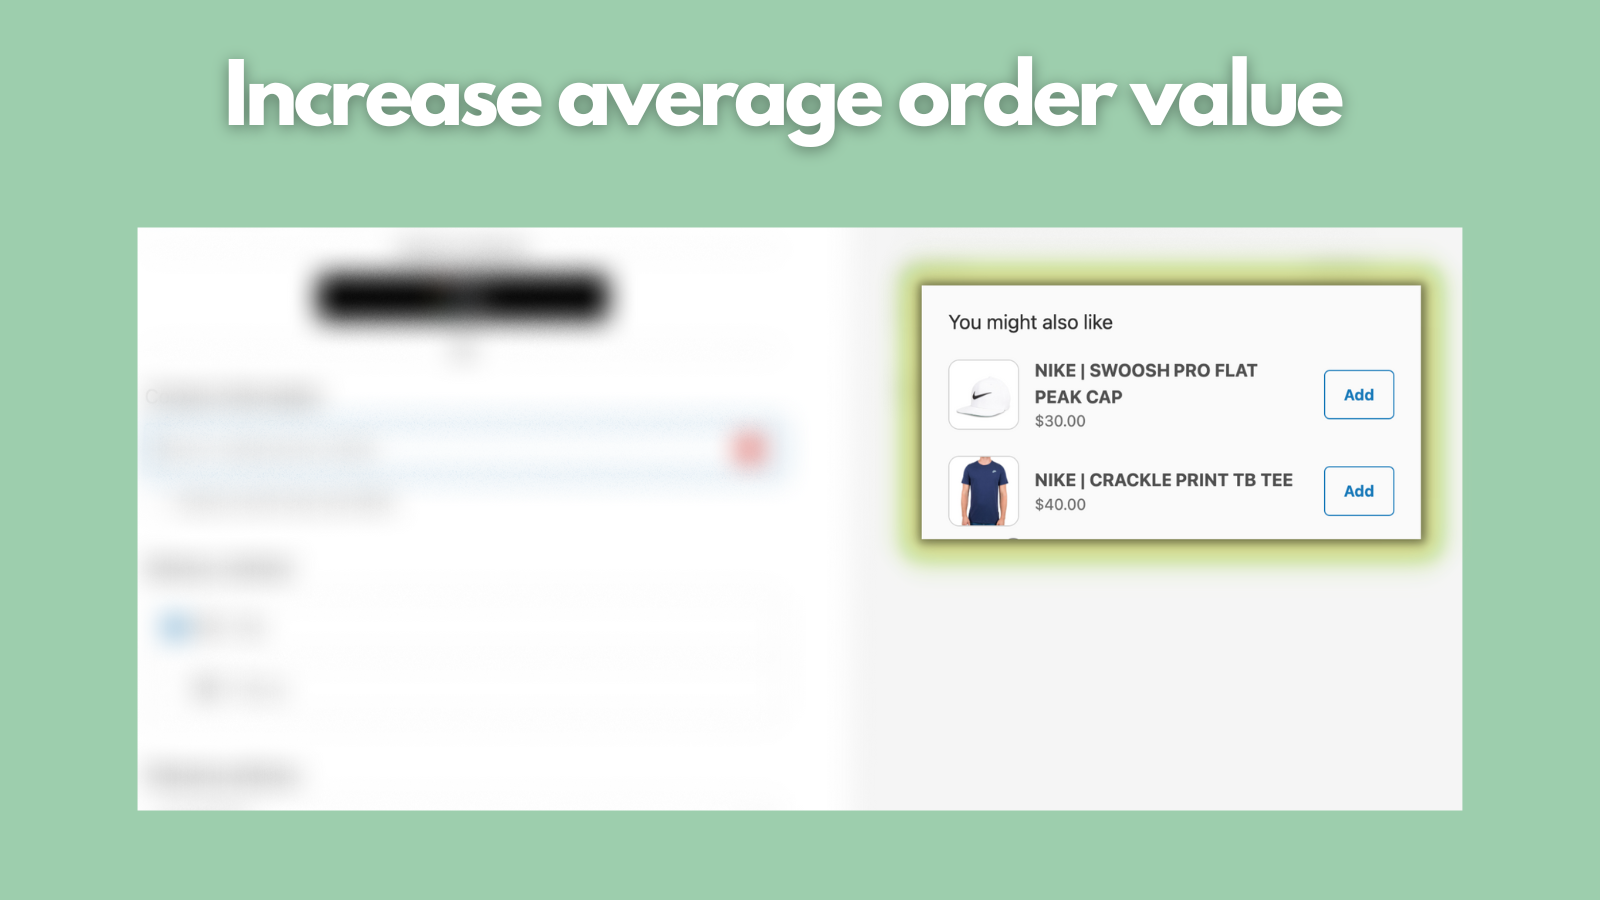 Increase Average Order Value with cross sells